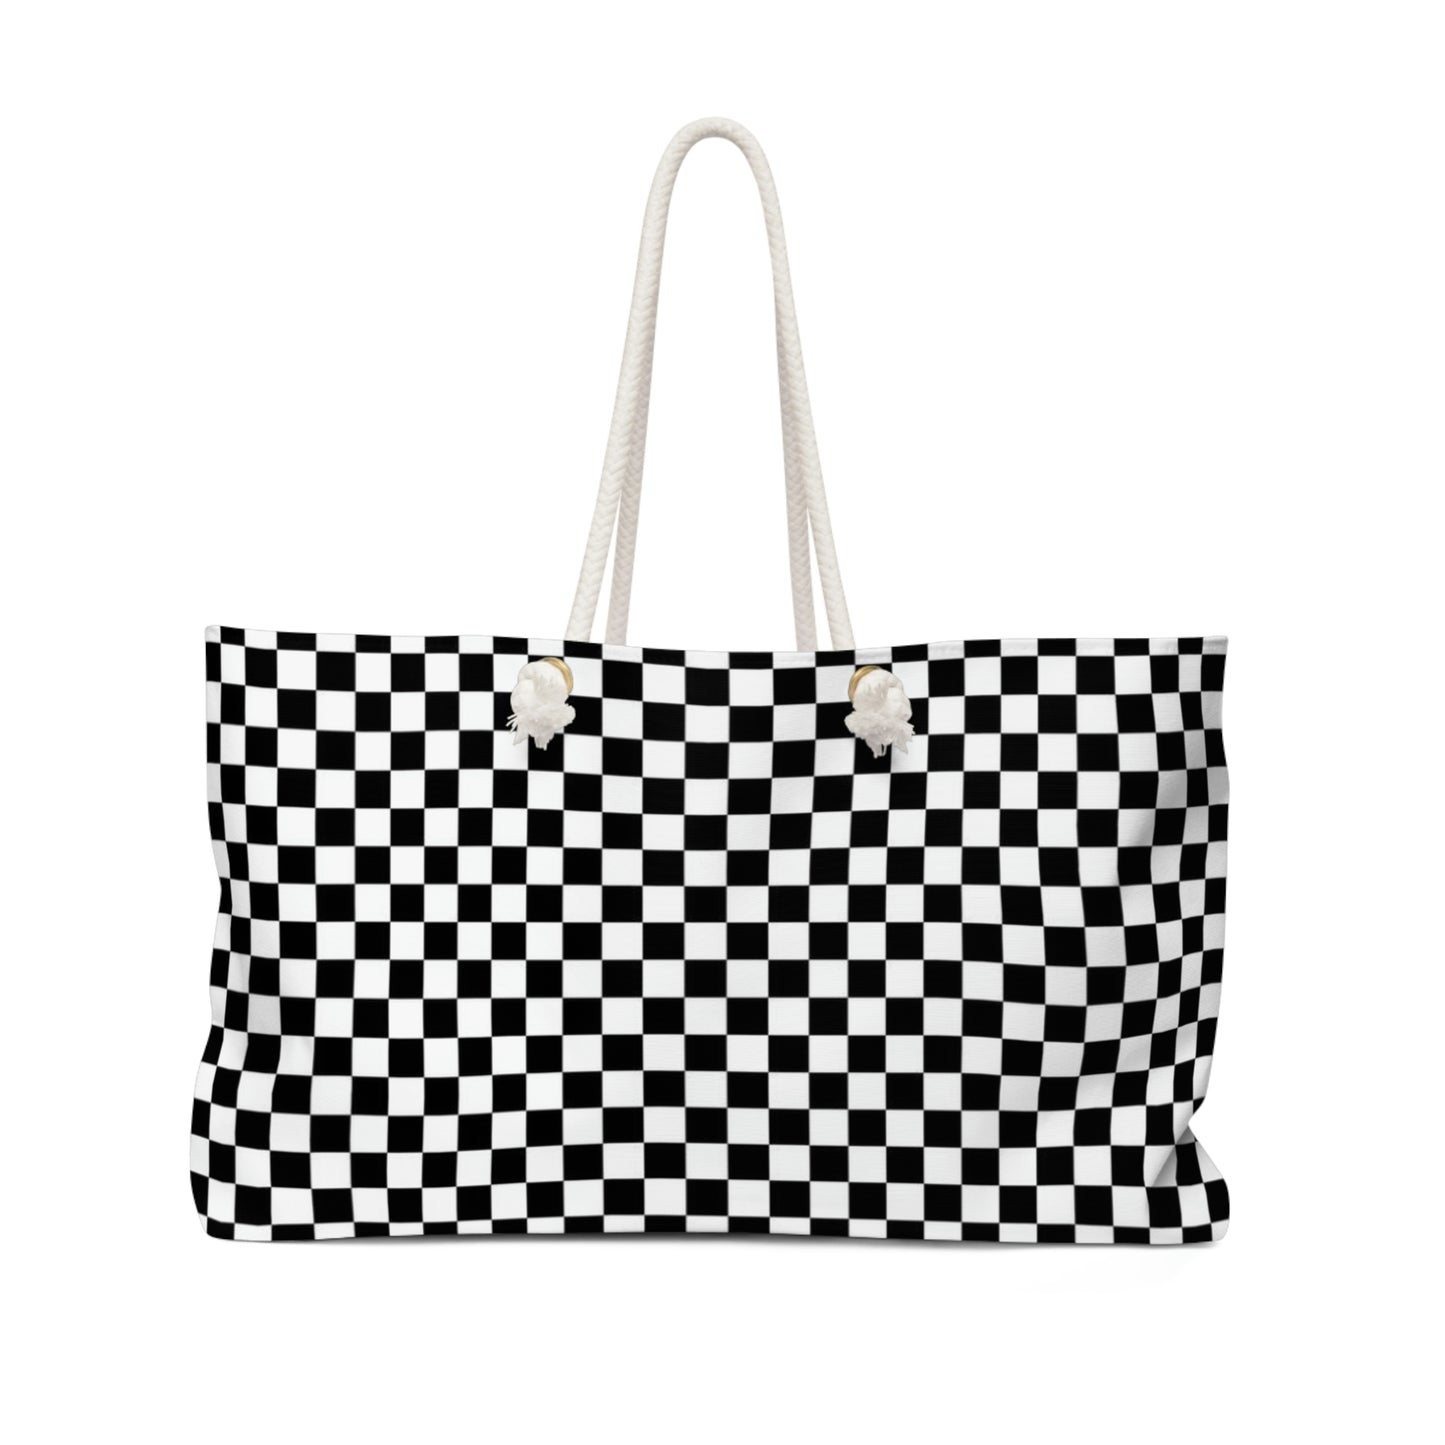 Checkered Tote Bag with Rope Handles, Black White Check Racing Flag Beach Canvas Weekender Pool Travel Large Shoulder Bag Starcove Fashion